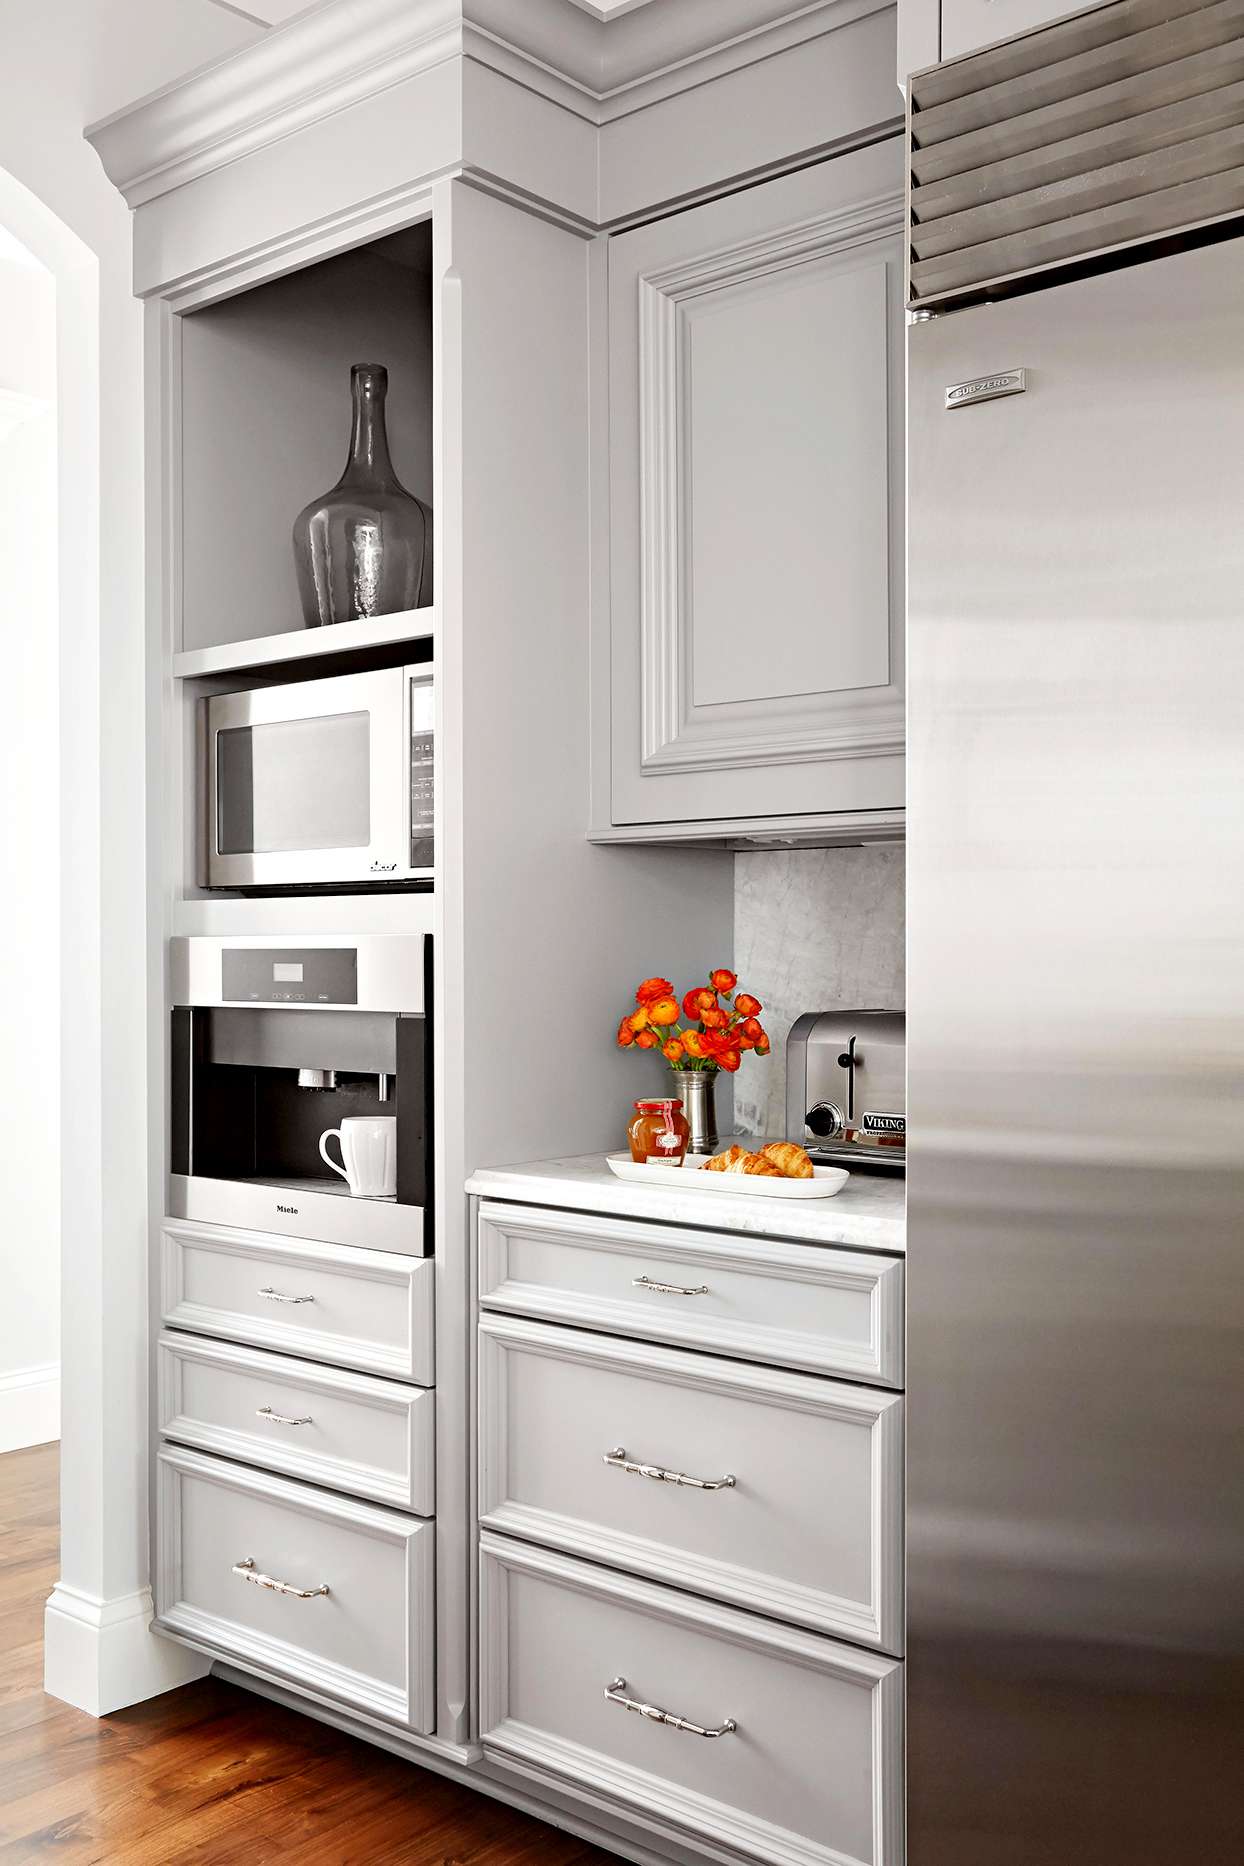 Grey painted cabinetry with stainless steel refrigerator